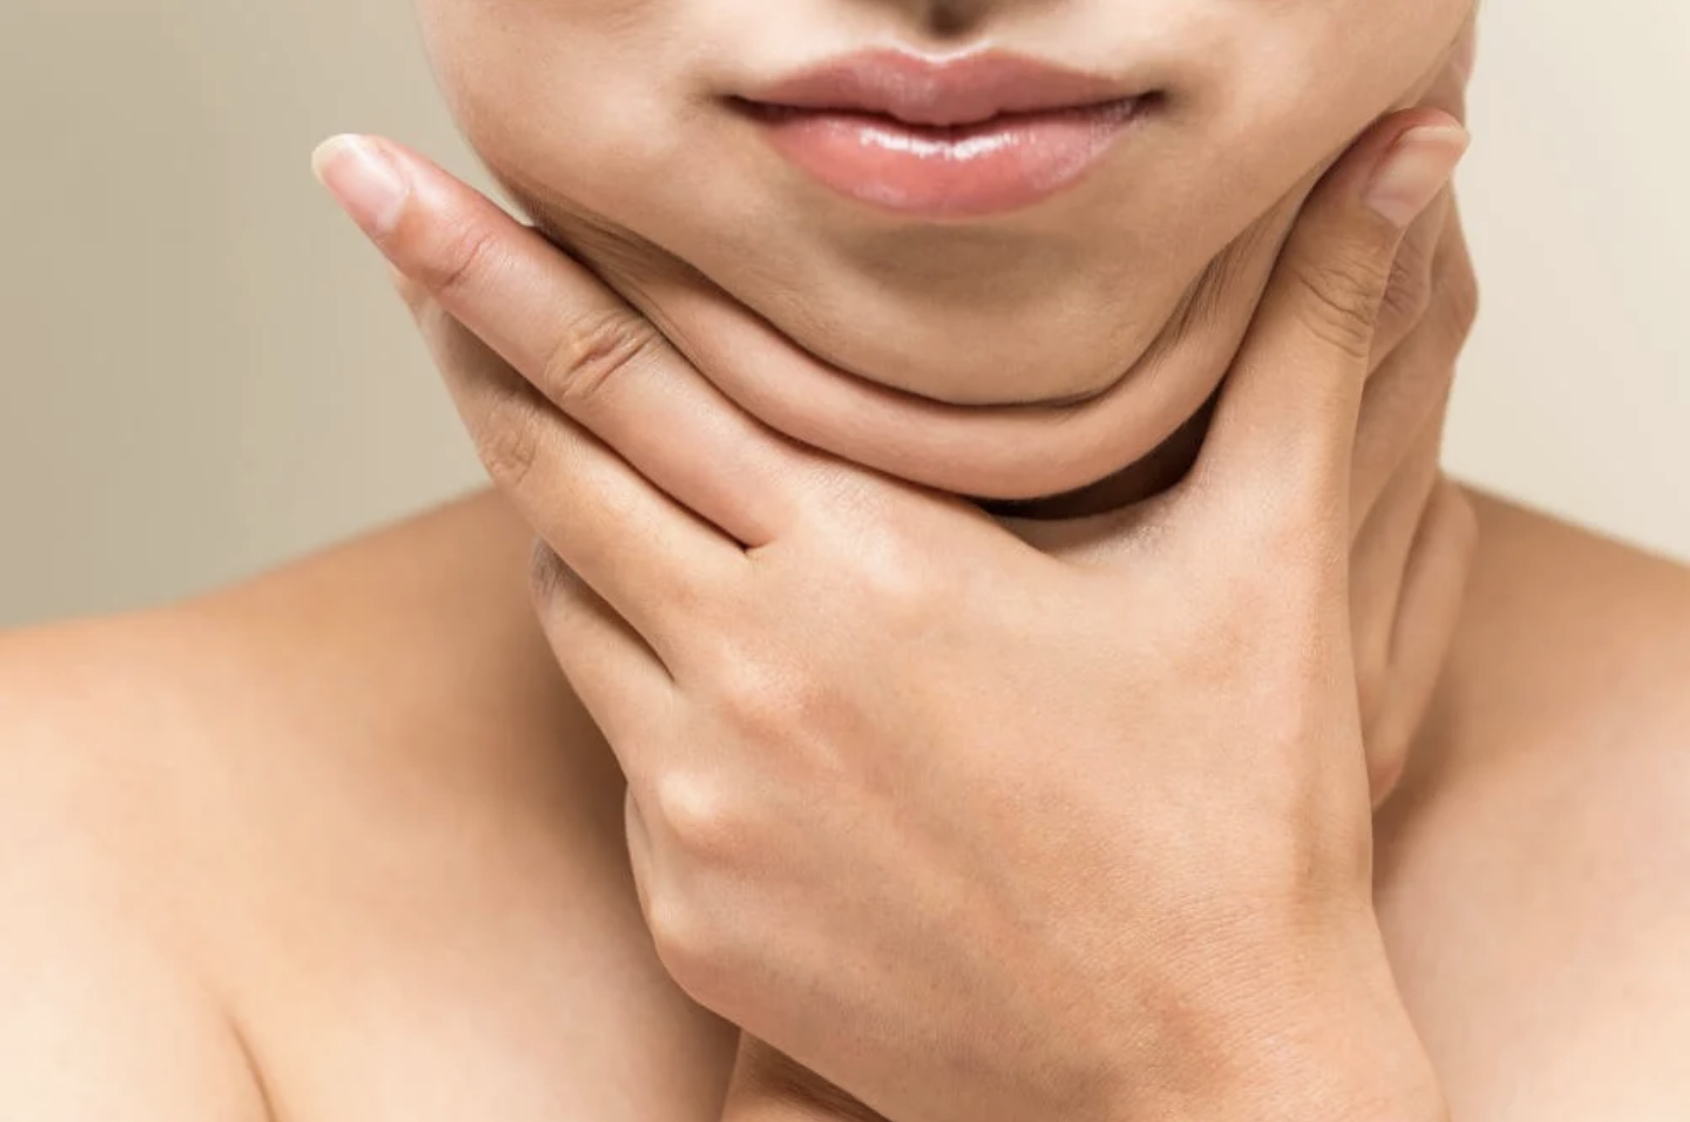 North Shore Cosmetic Surgery Blog | Chin Liposuction in Long Island: How to Get Rid of That Double Chin